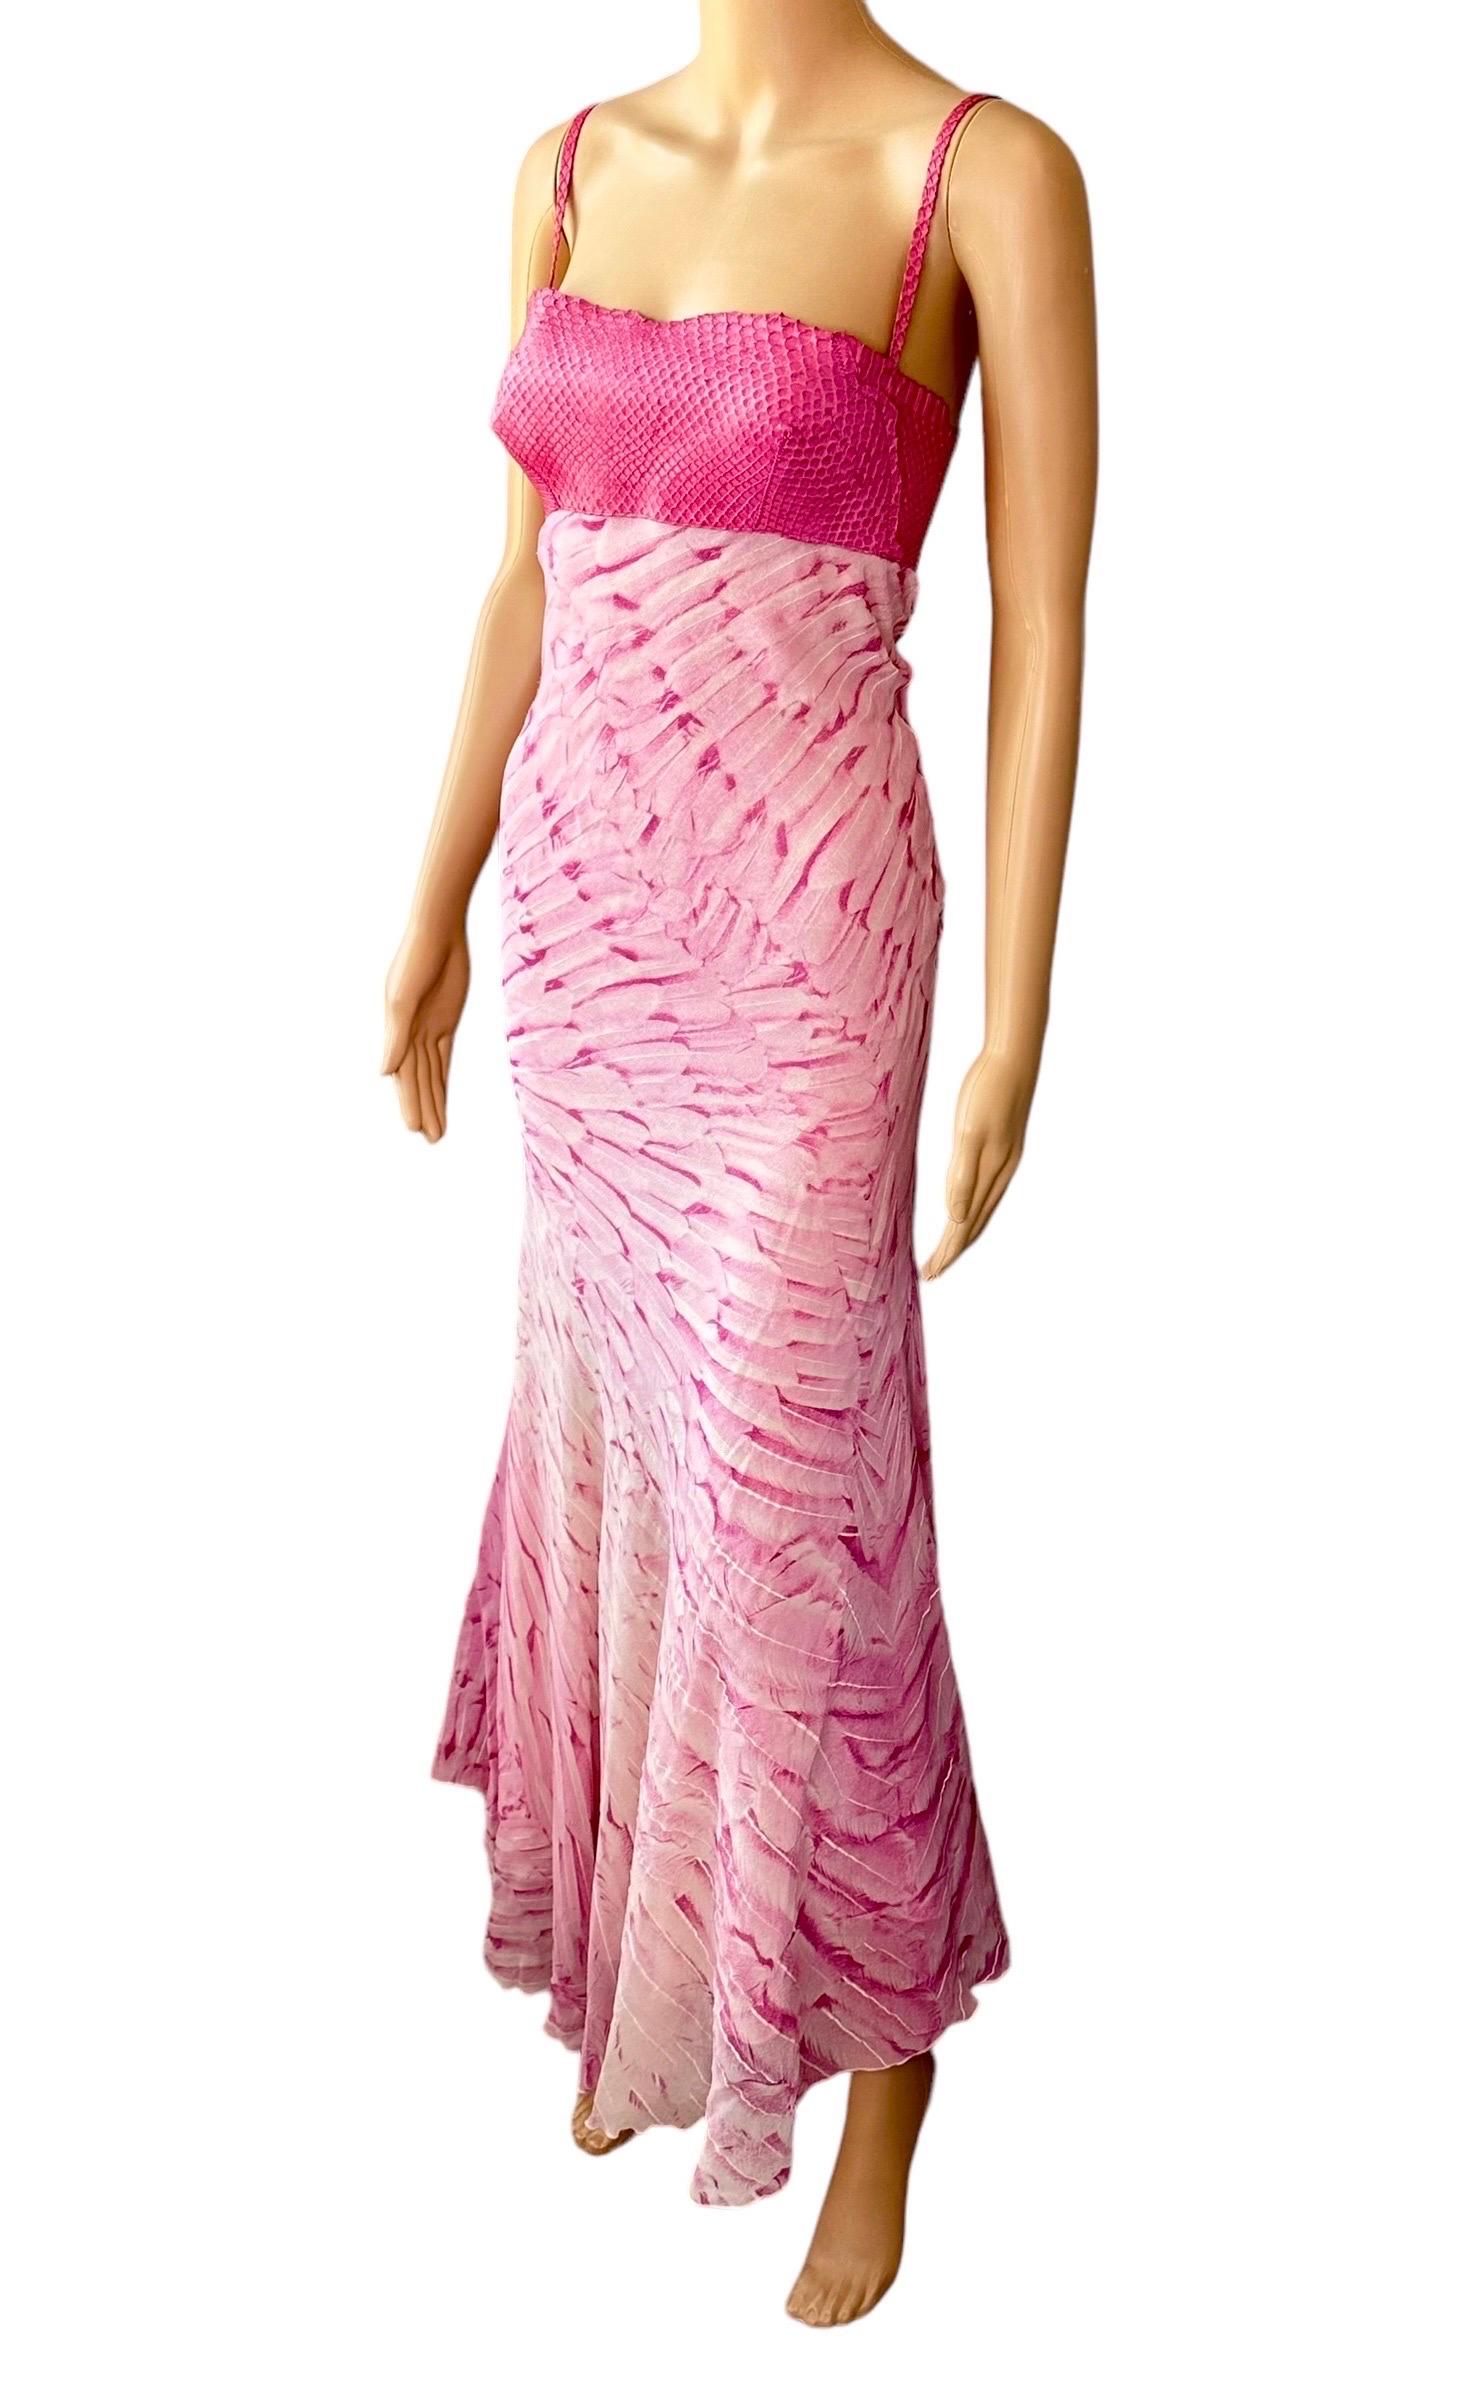 Roberto Cavalli S/S 1999 Runway Snakeskin Feather Print Silk Maxi Evening Dress In Good Condition For Sale In Naples, FL